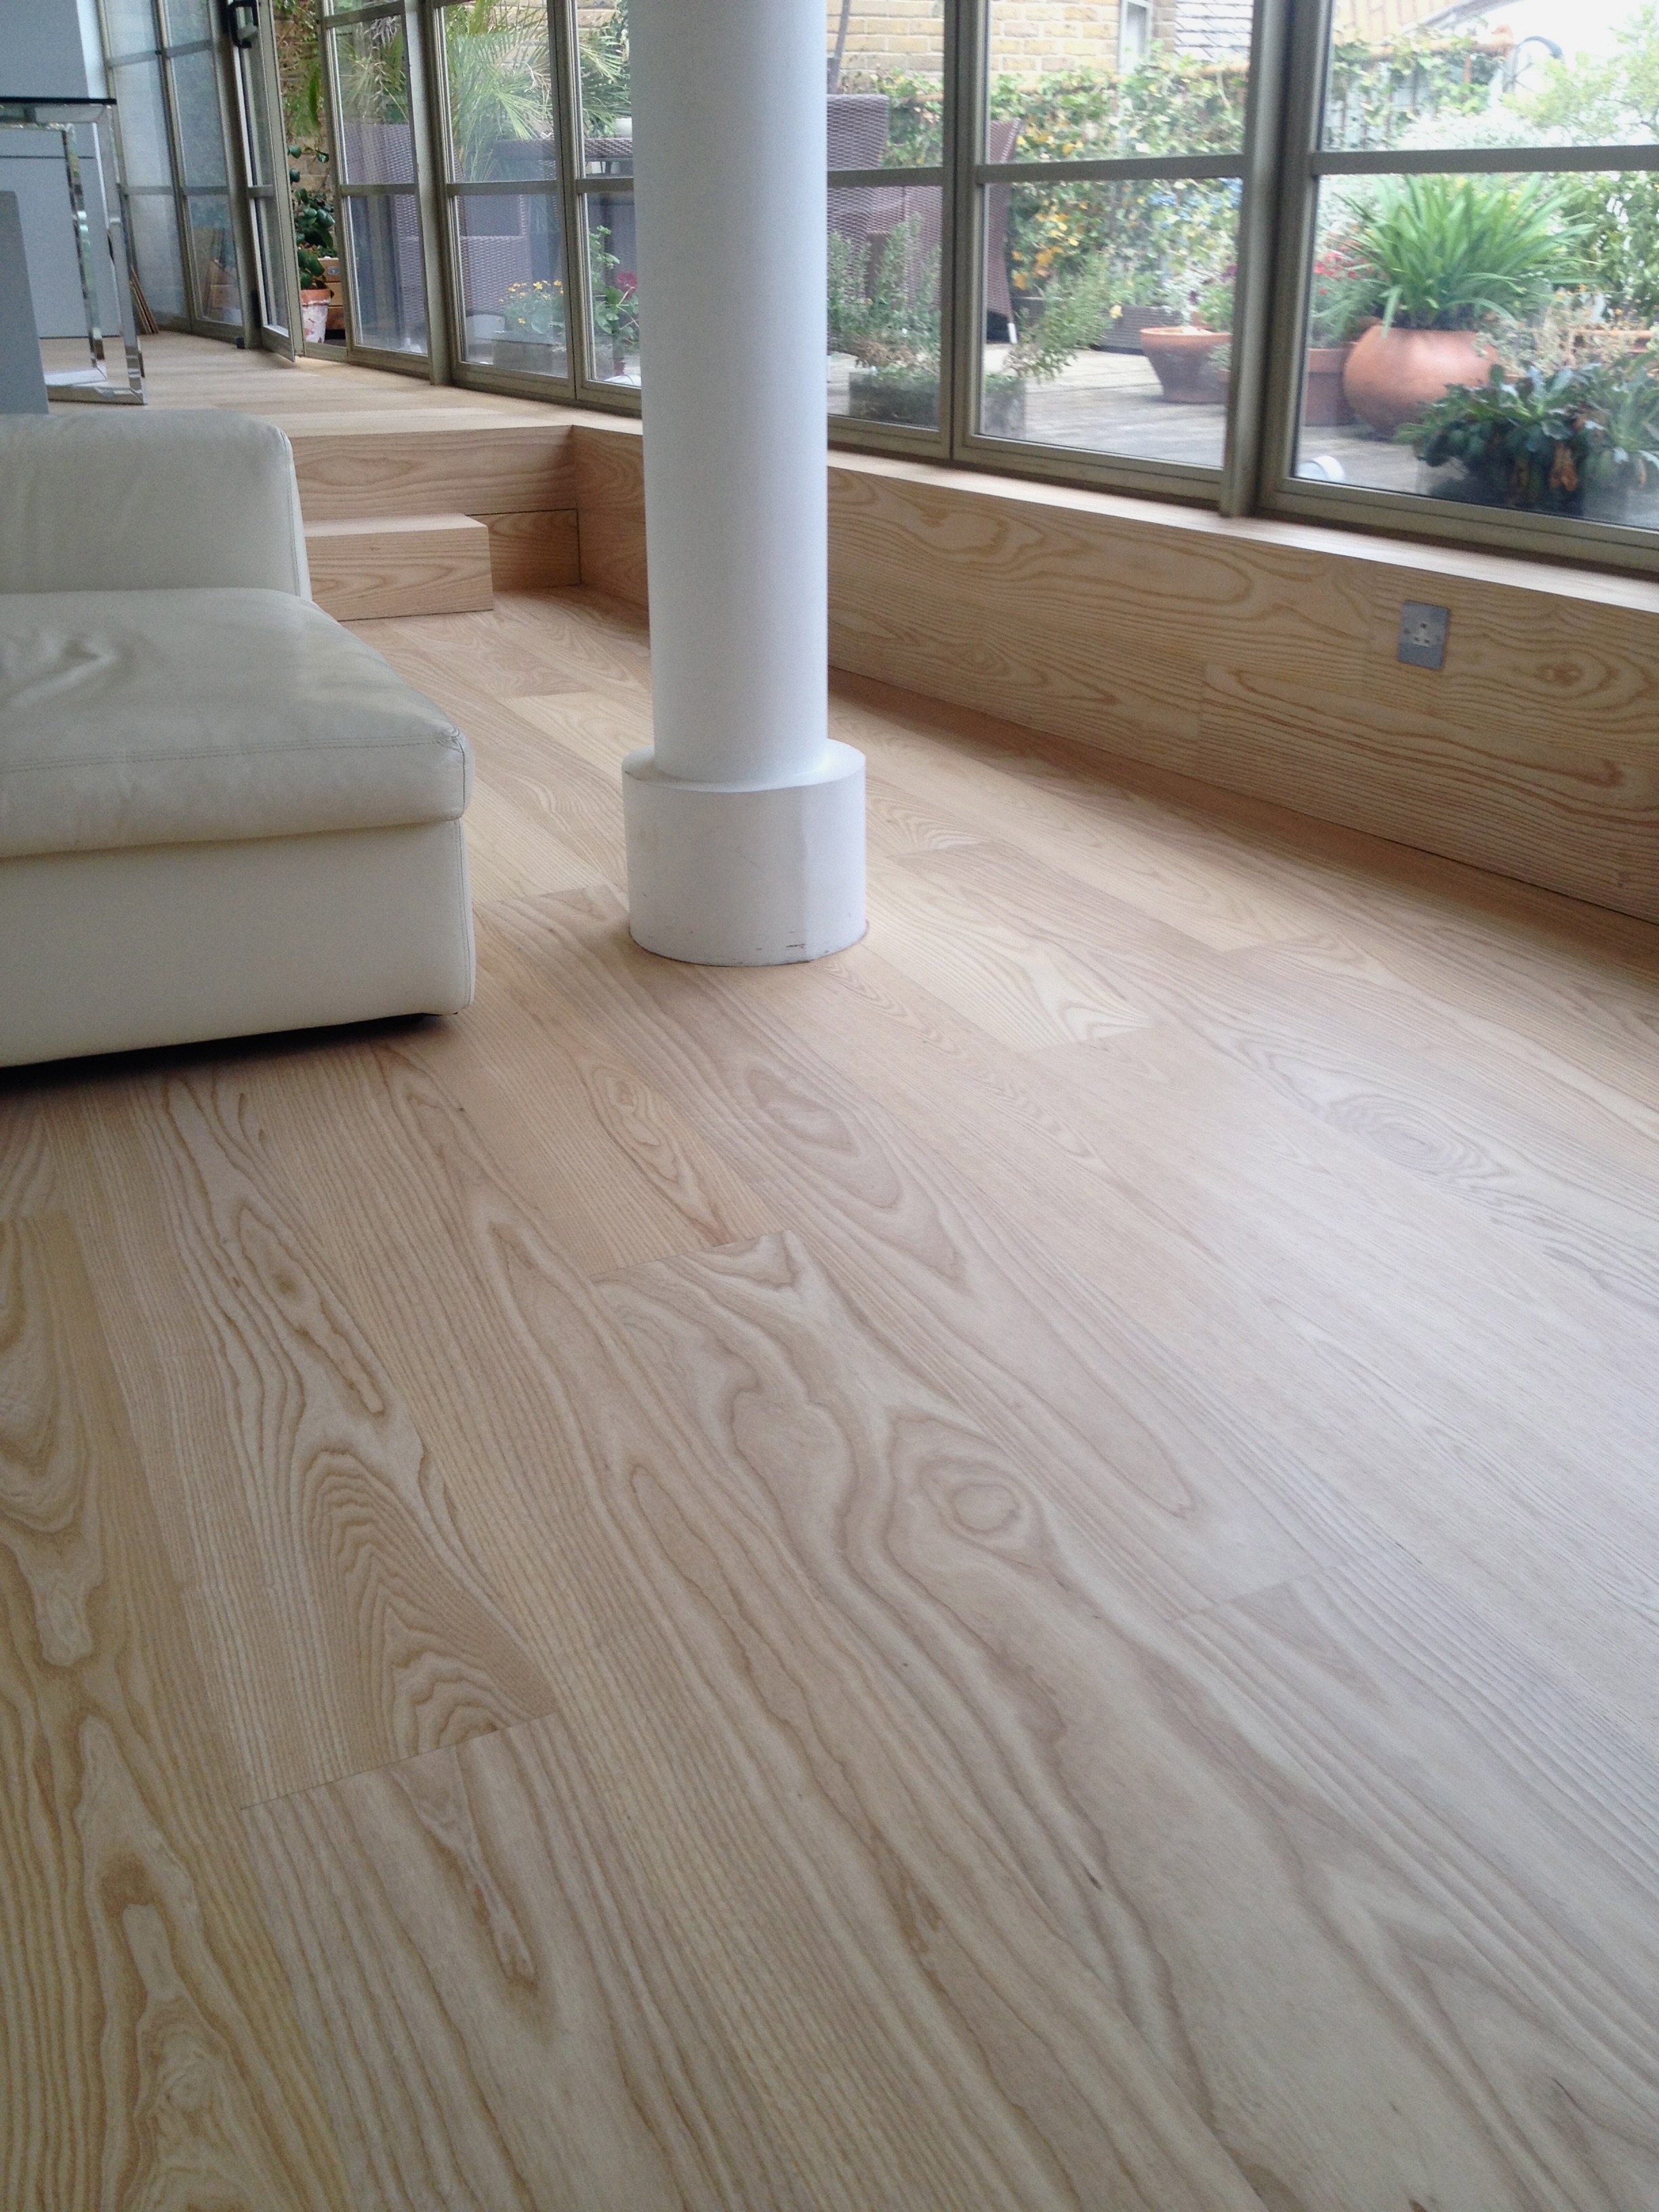 Ash floor with natural finish.